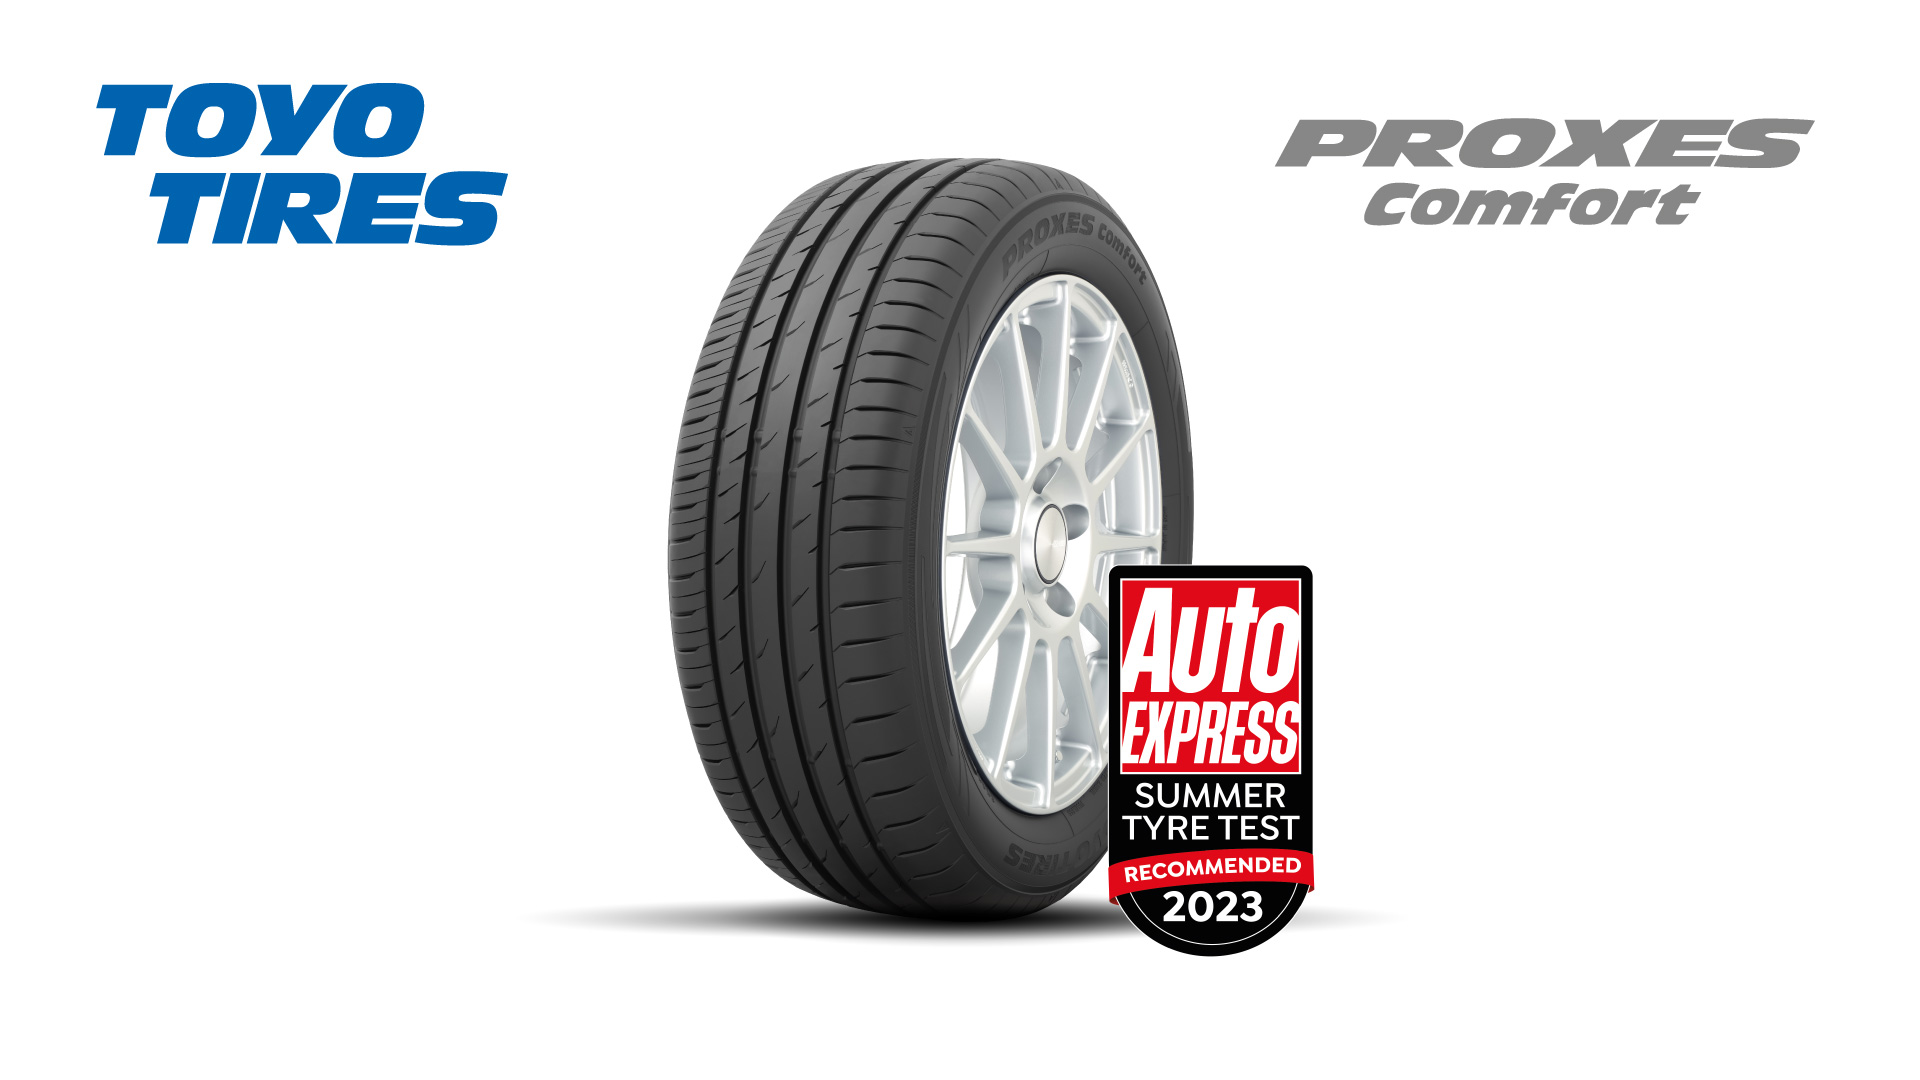 Proxes Comfort Auto Express